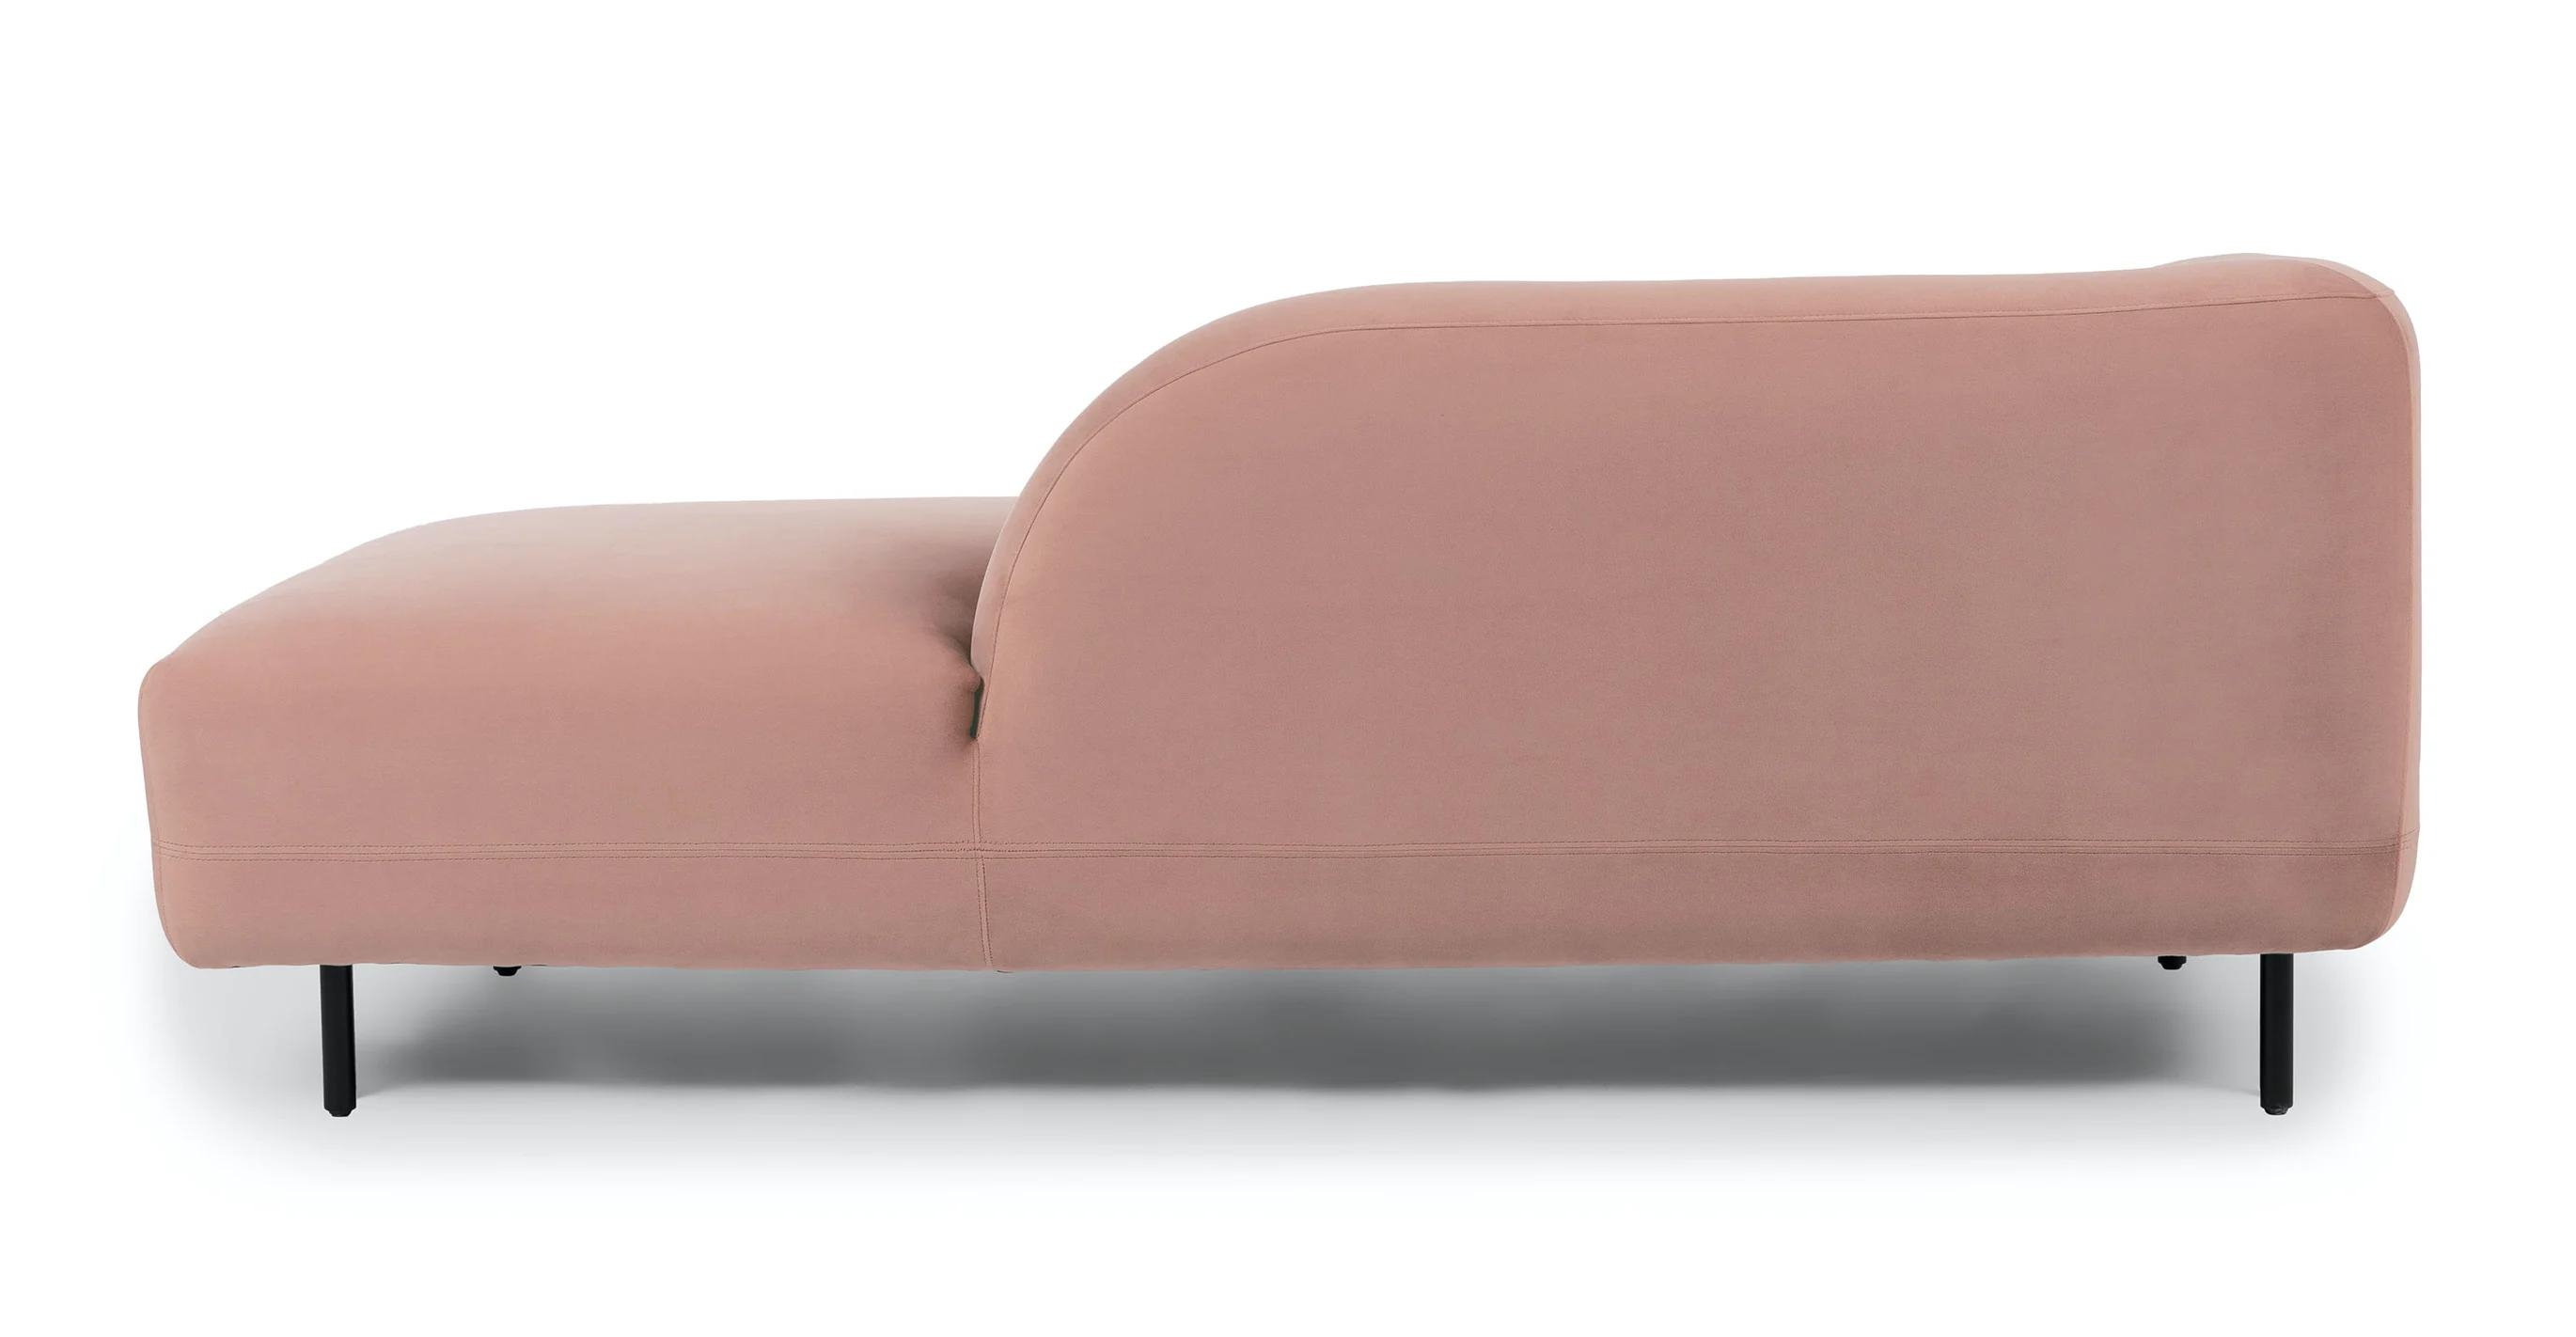 Lupra Daybed, Hibiscus Pink - Image 4